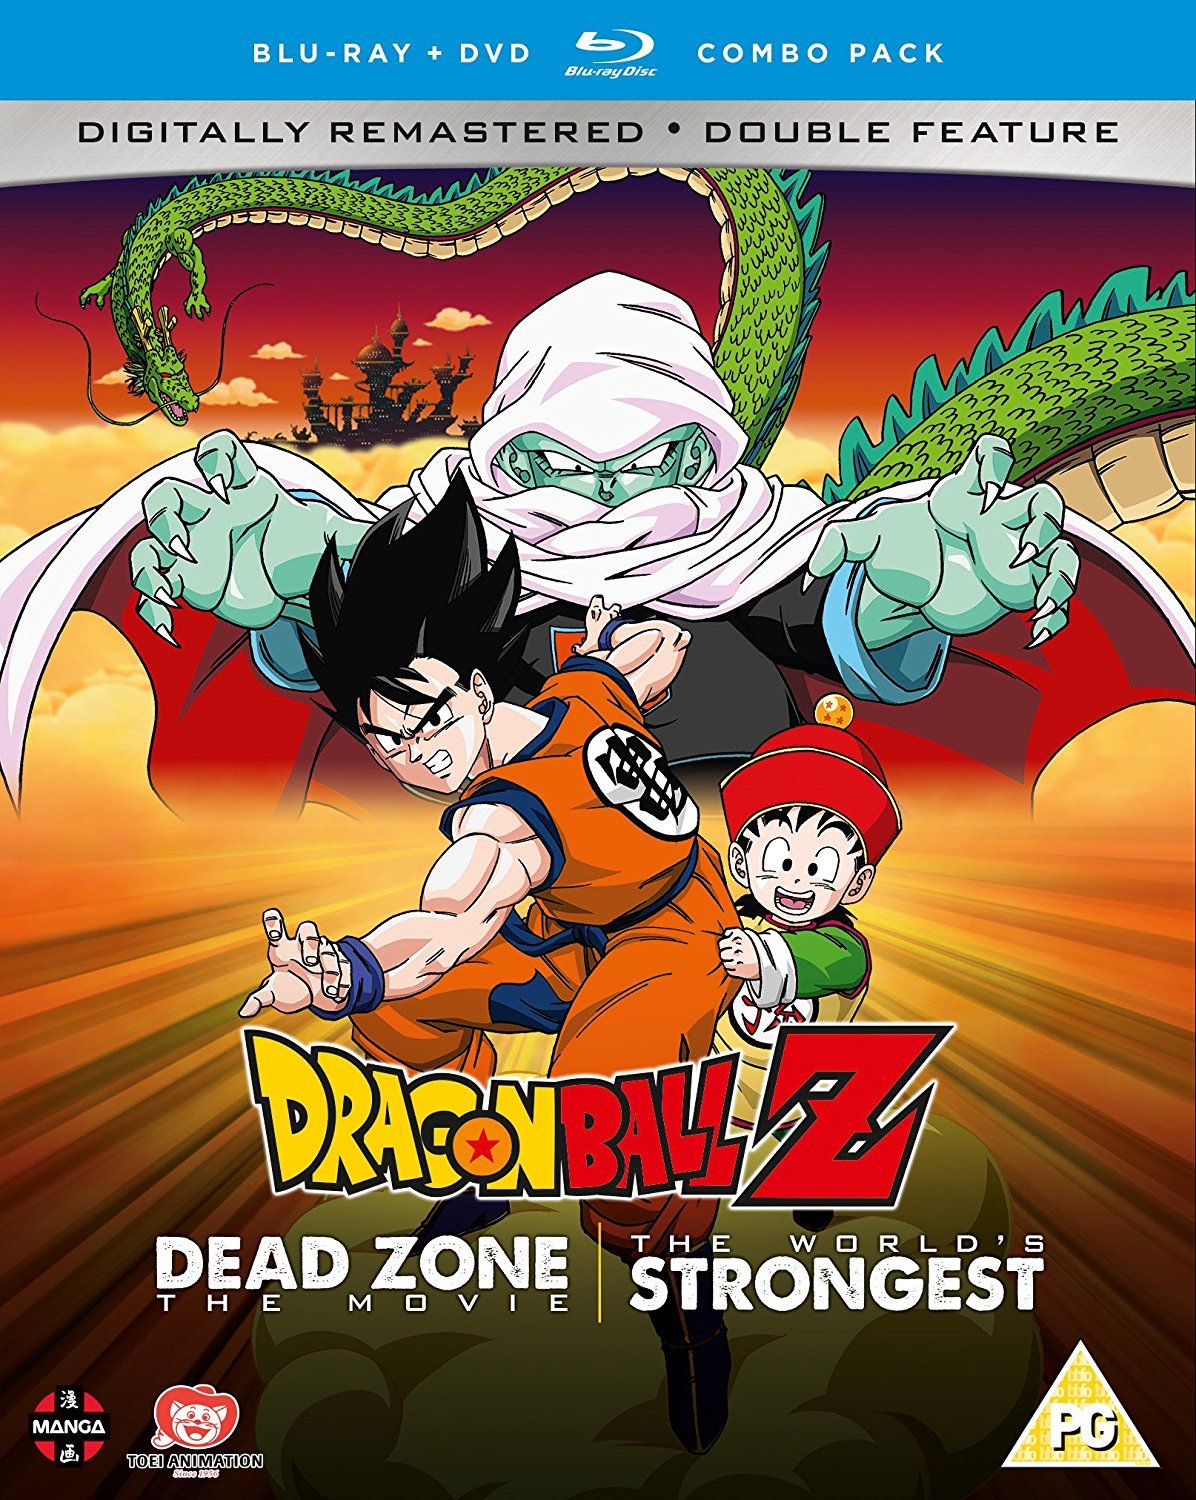 benson williams recommends dragonball z online movies pic